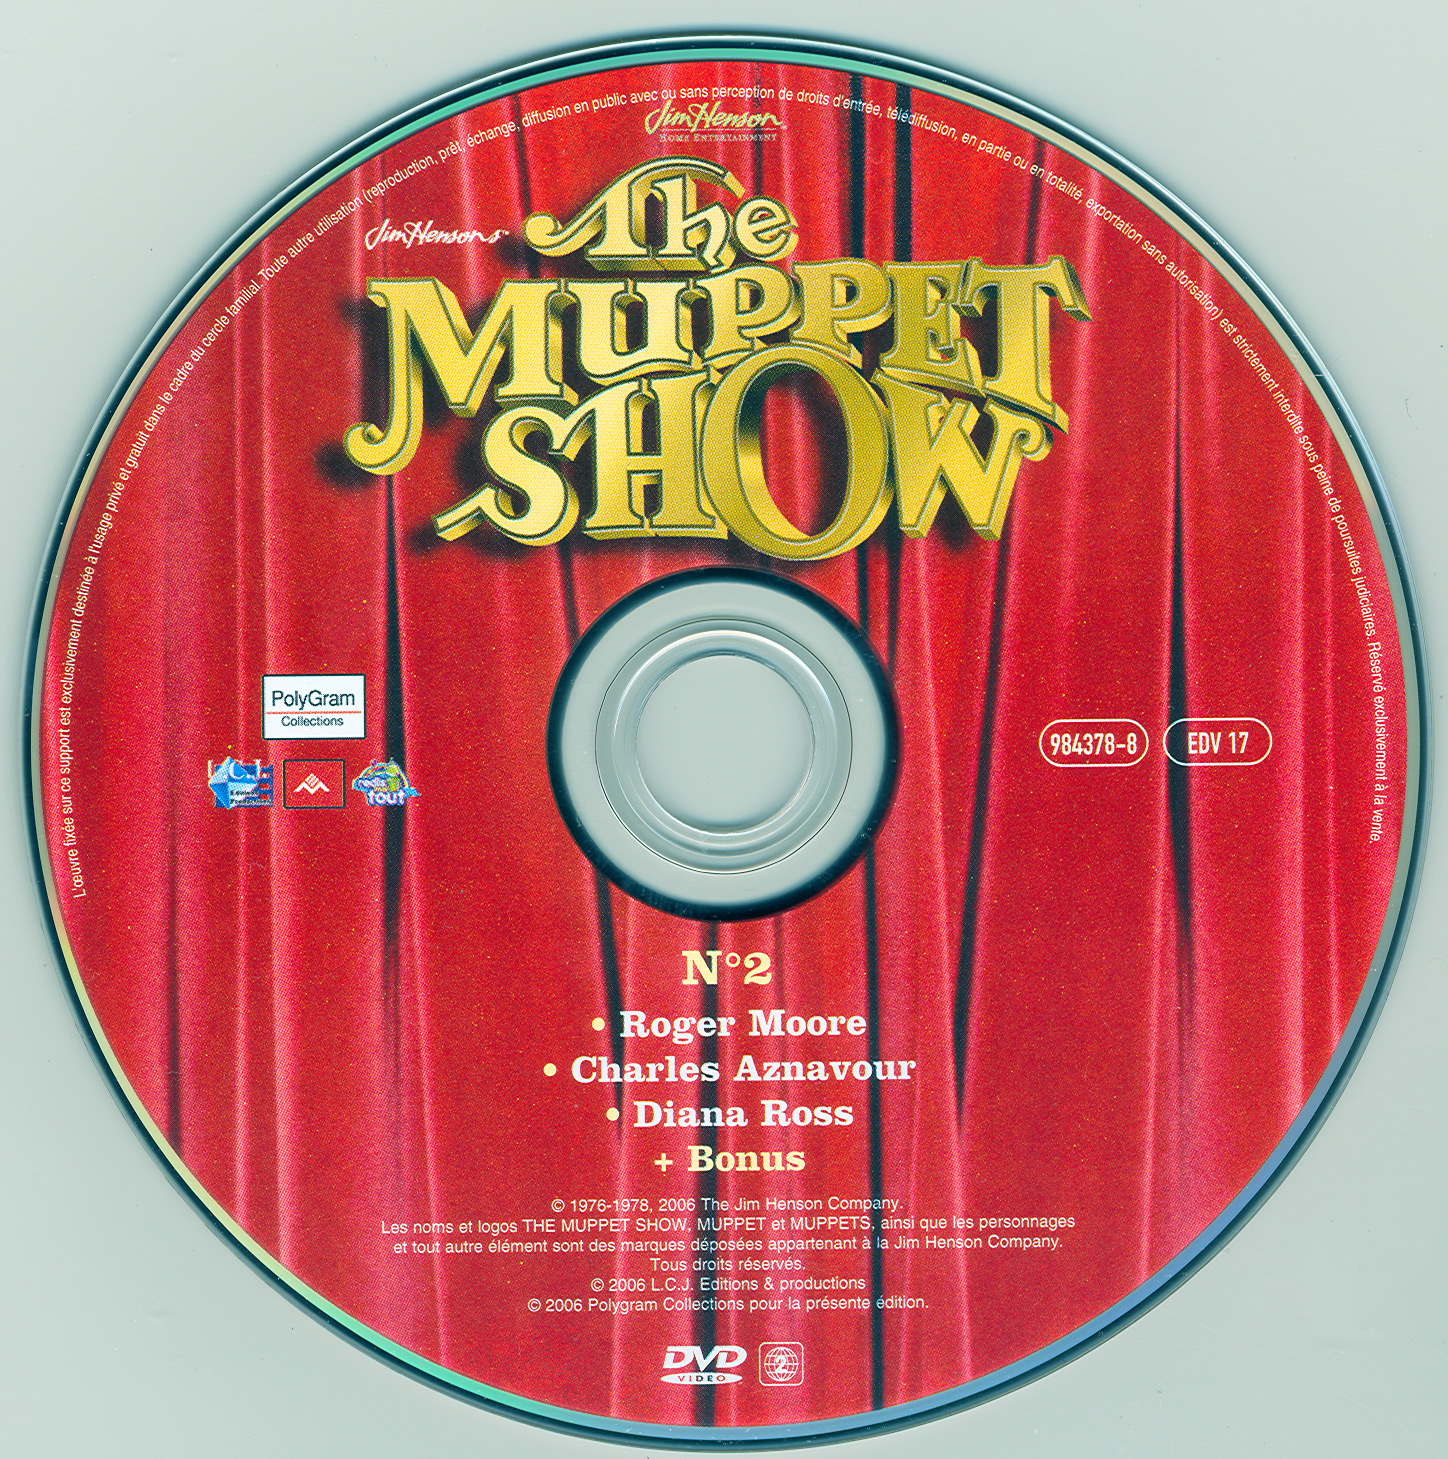 The muppet show vol 2